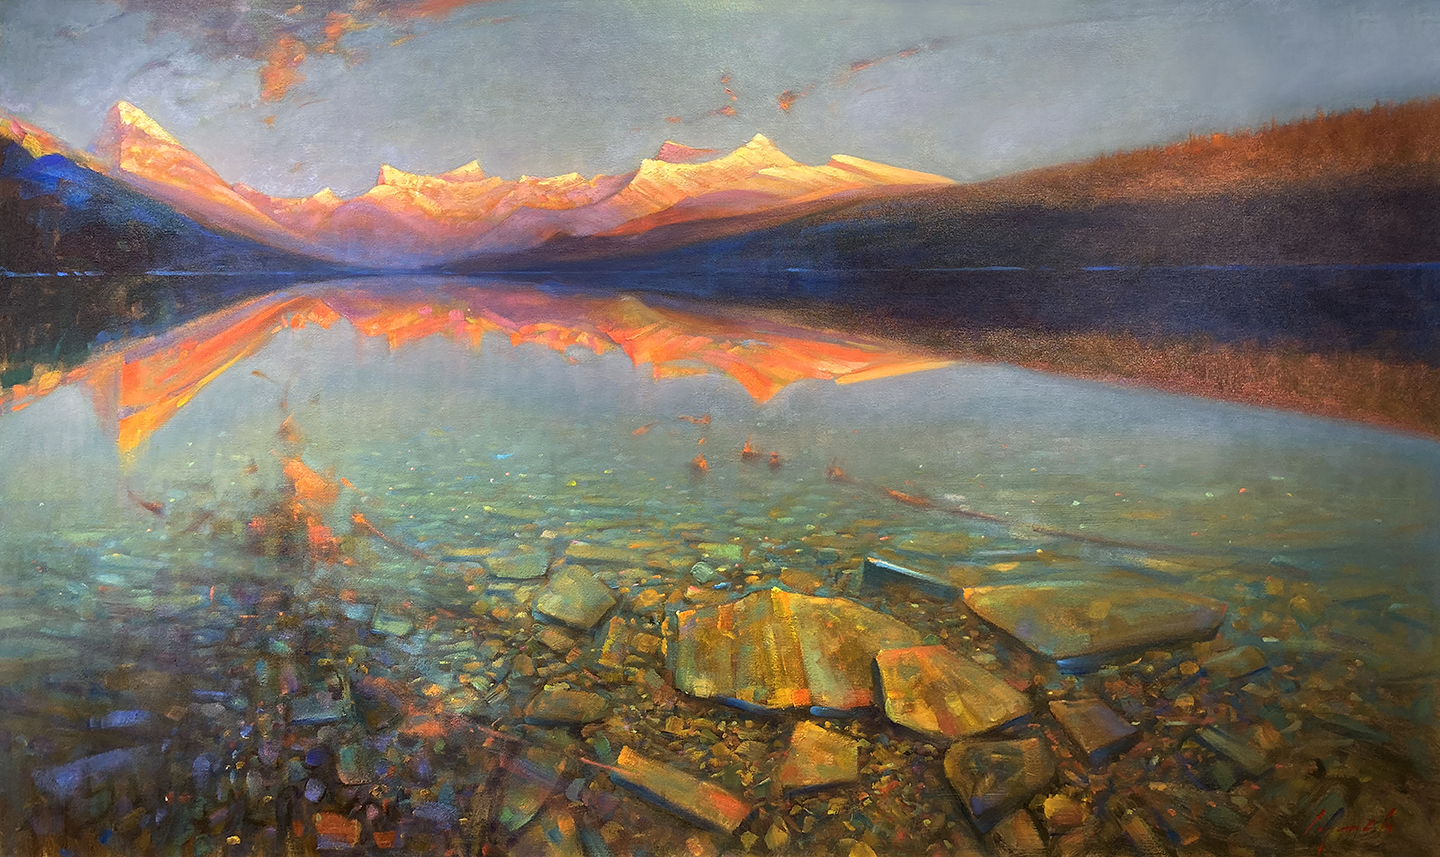 Jewels in Maligne' 36 X 60 in. oil on canvas - sold by Mountain Galleries